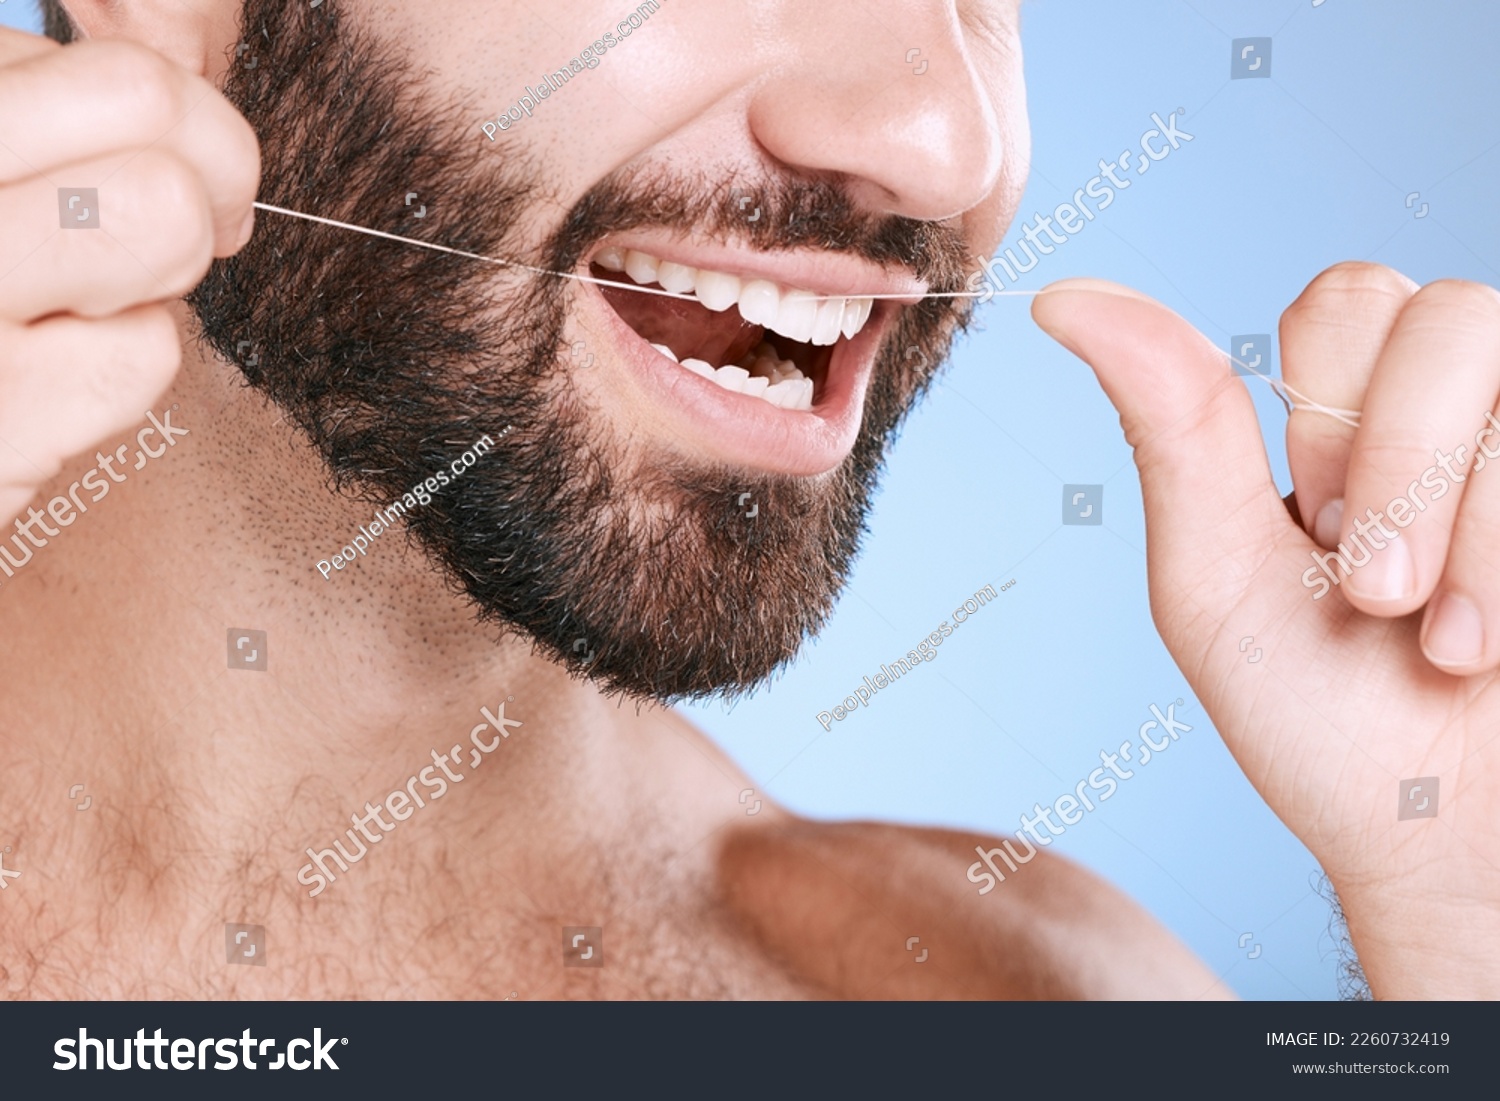 Dental, floss and oral hygiene with a man in studio on a blue background cleaning his teeth for healthy gums. Dentist, healthcare and mouth with a young male flossing to remove plague or gingivitis #2260732419